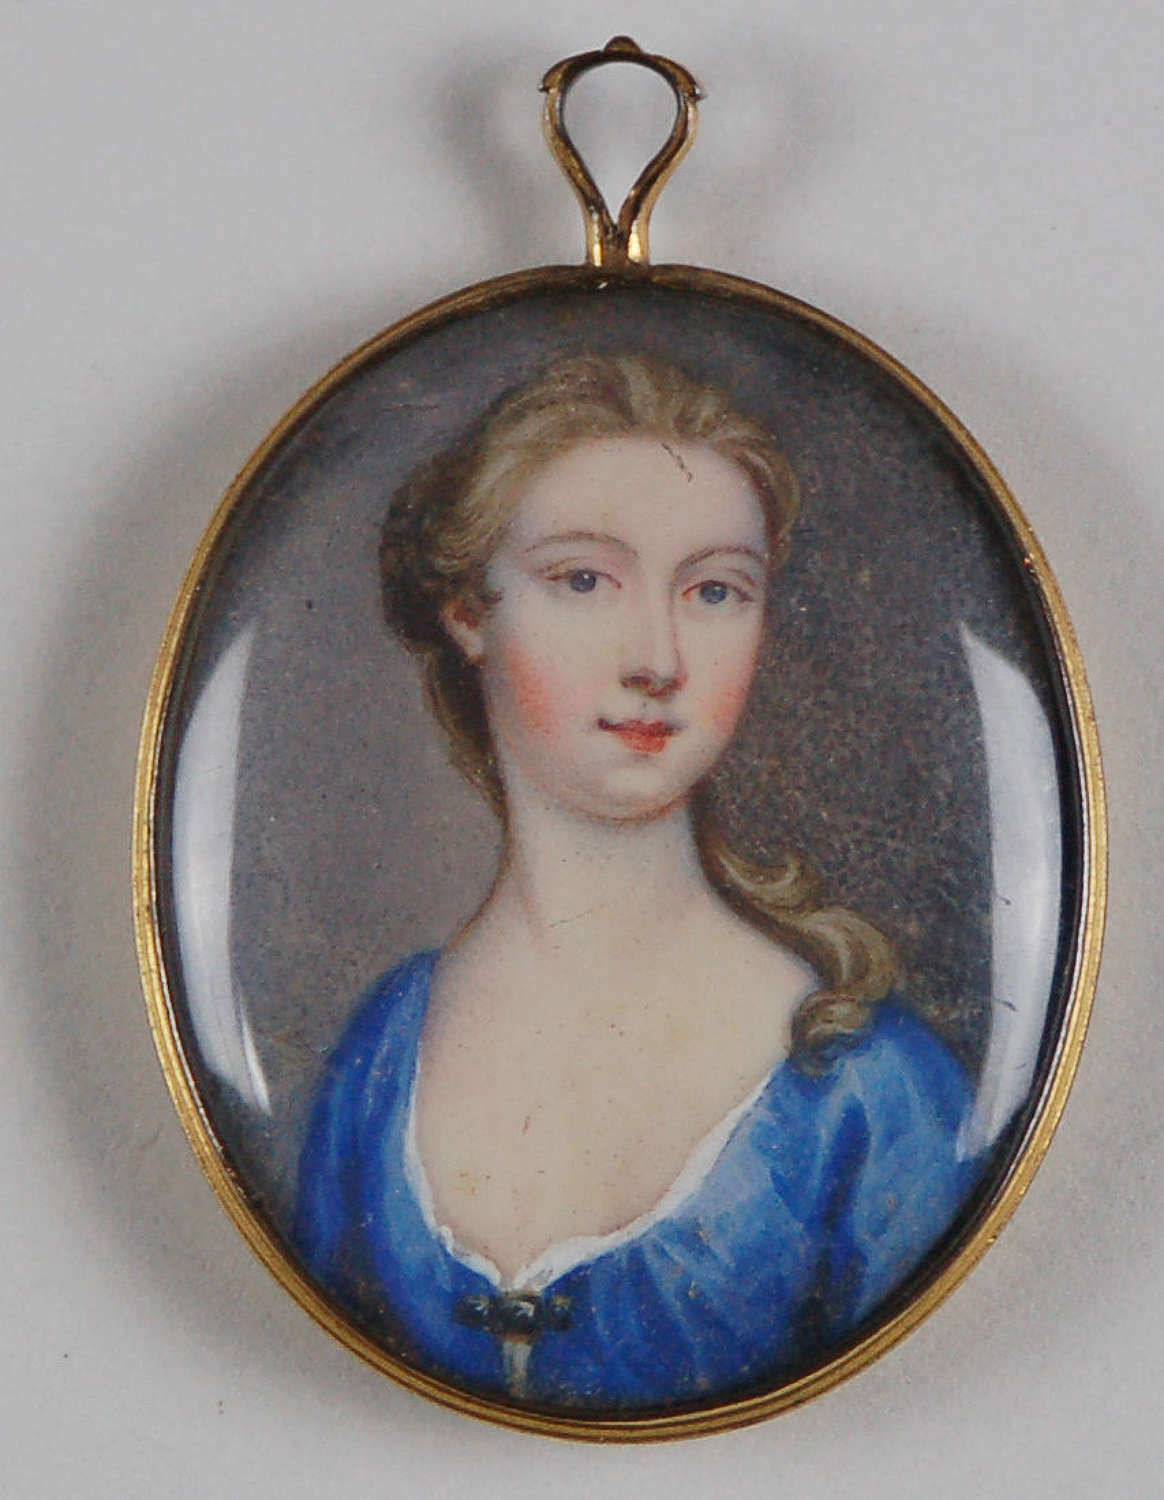 Miniature of pretty lady by C Richter C1720